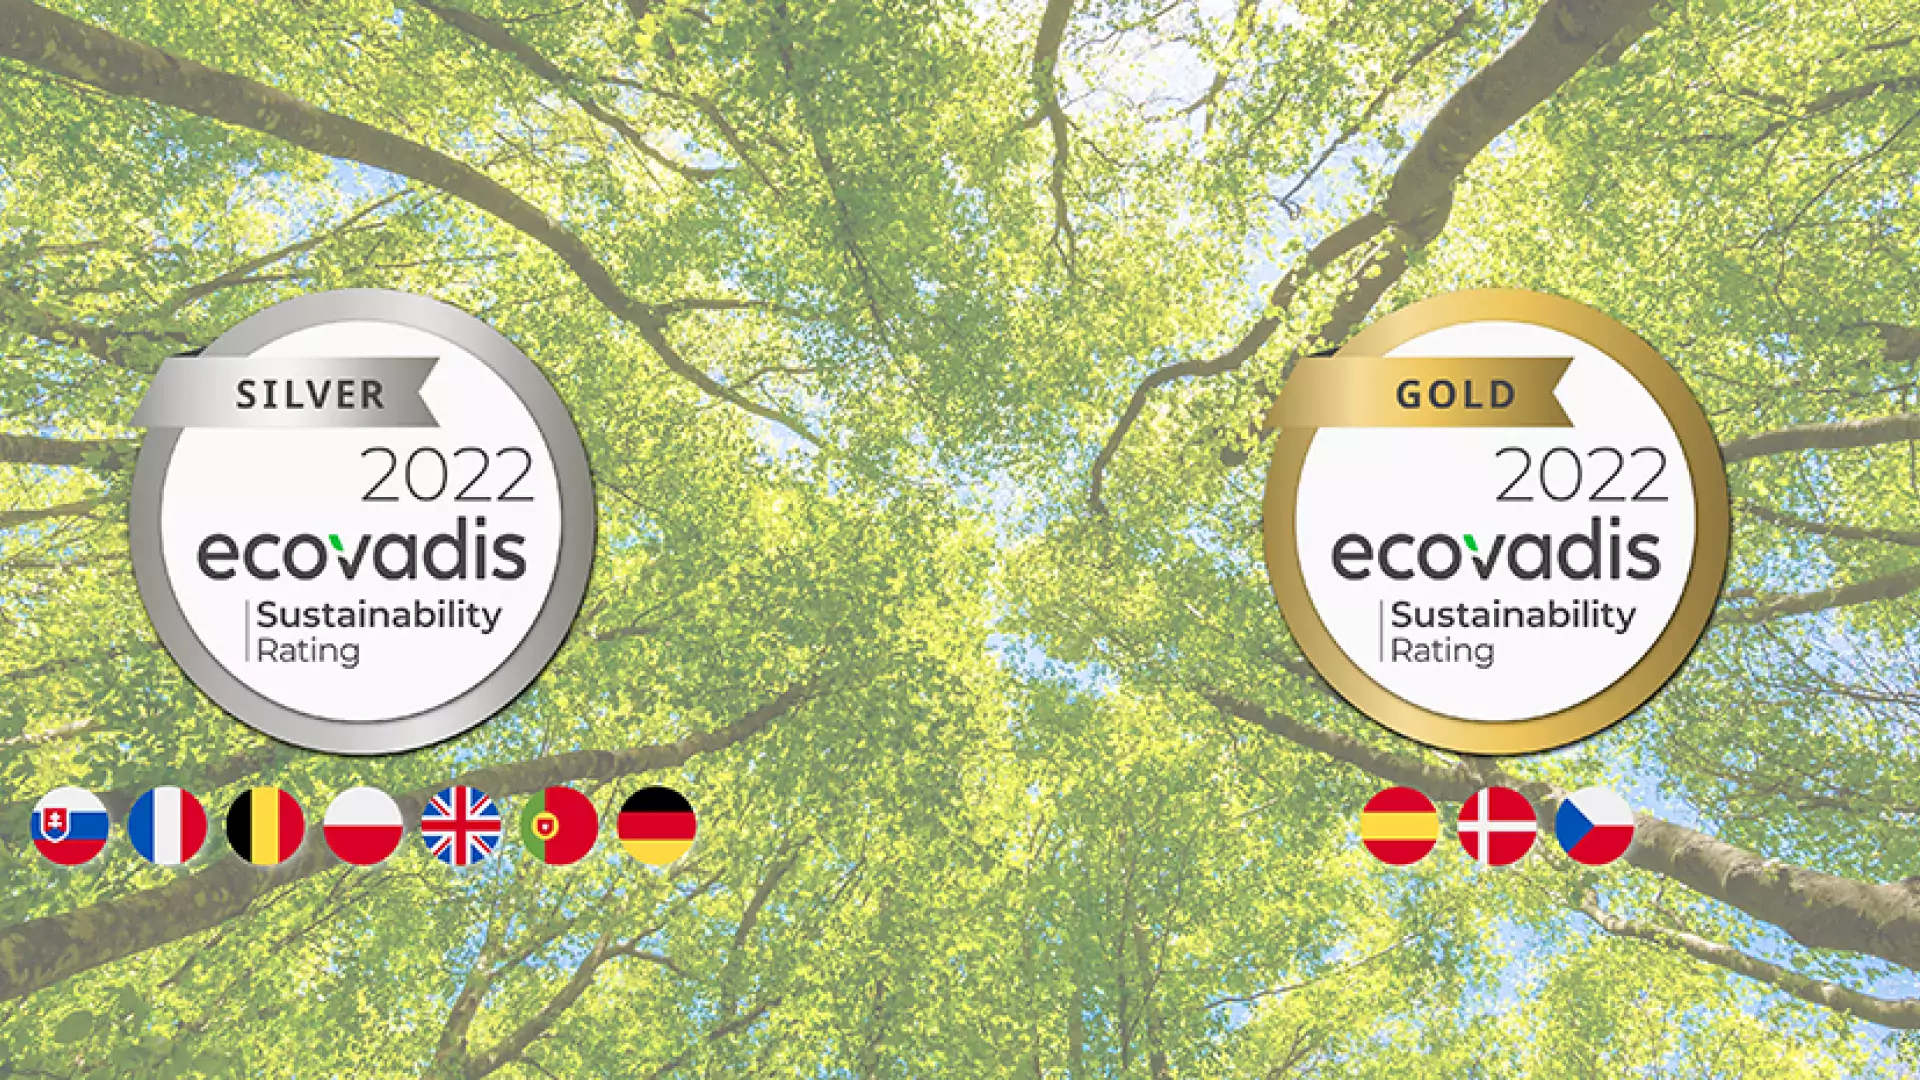 Silver and gold ecovadis certification 2022